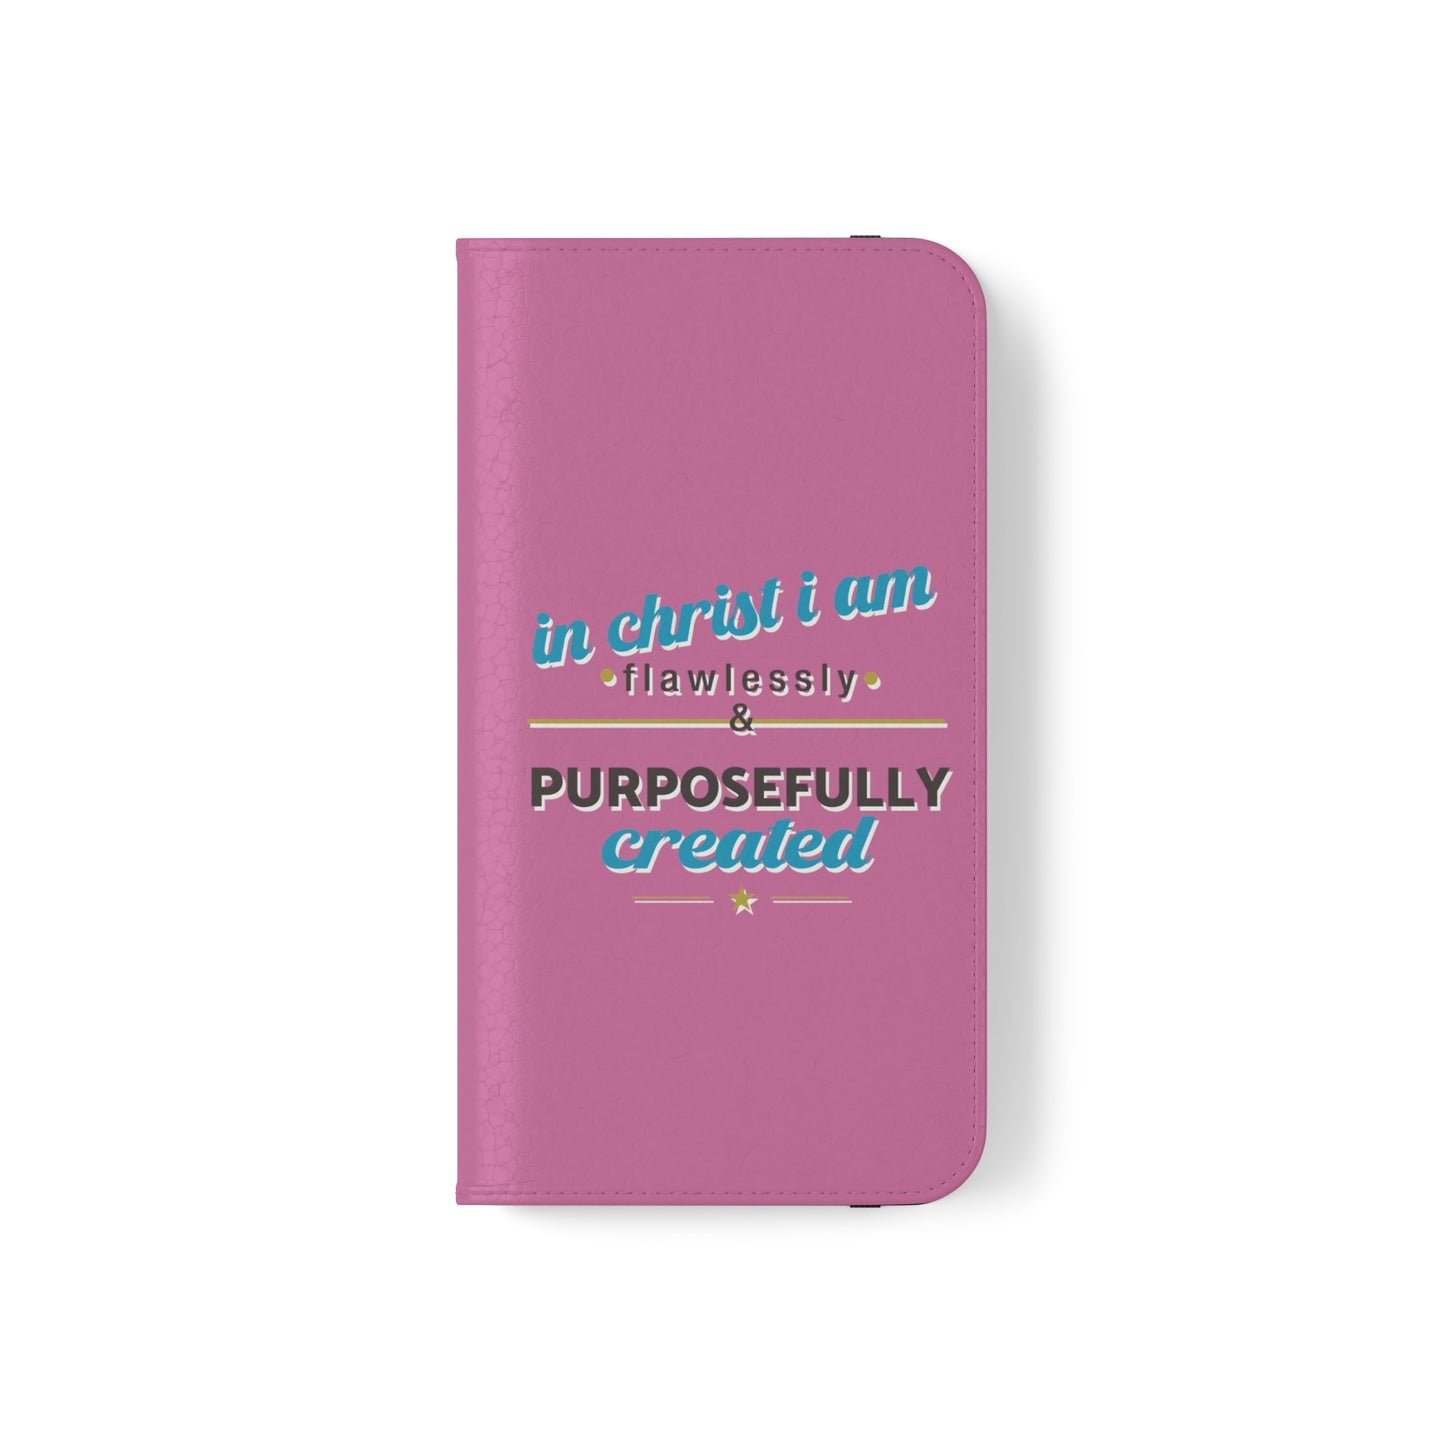 In Christ I Am Flawlessly & Purposefully Created Phone Flip Cases